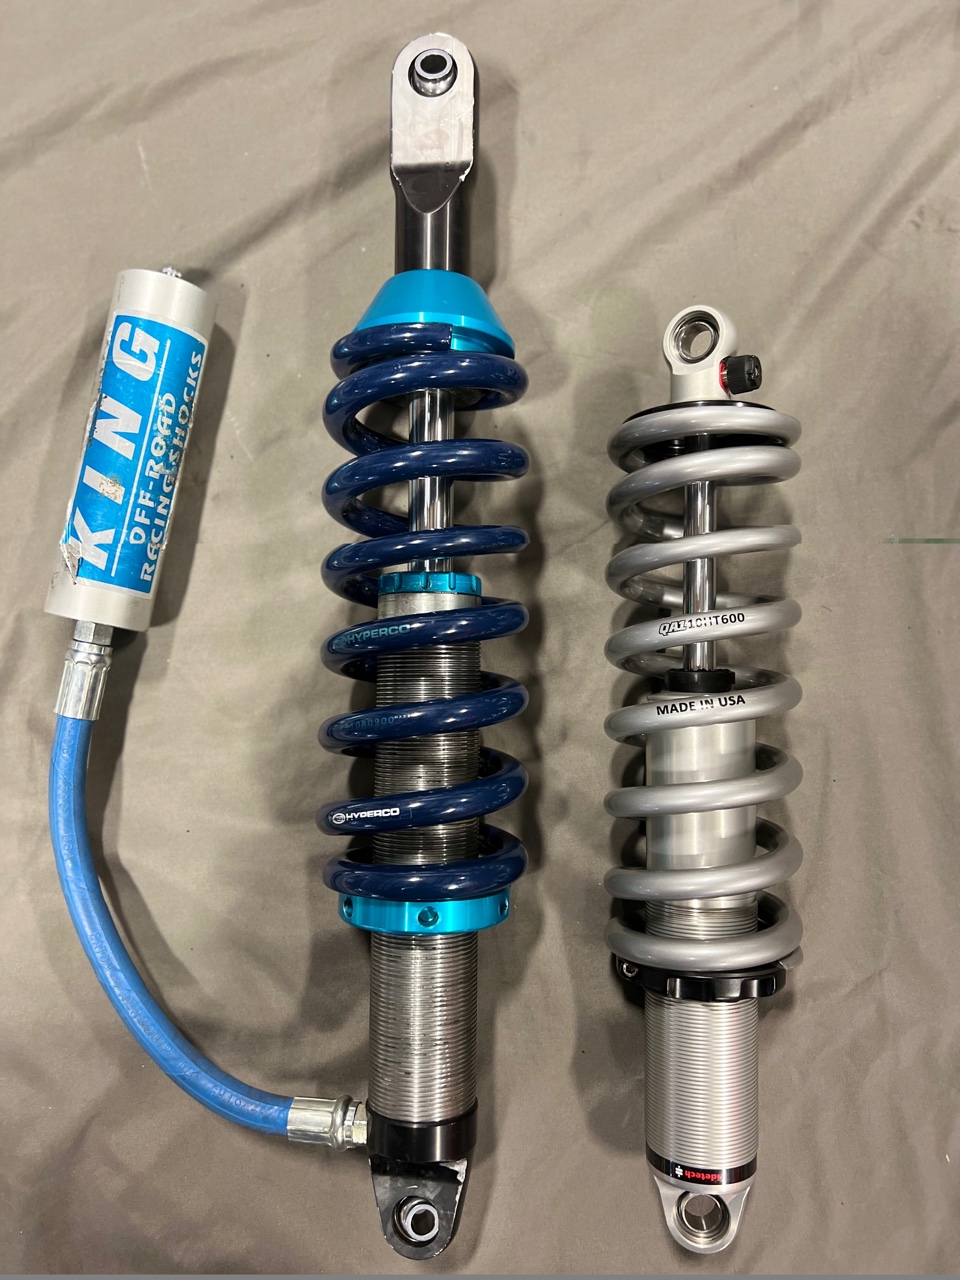 old (blue) and new (grey) shock absorbers